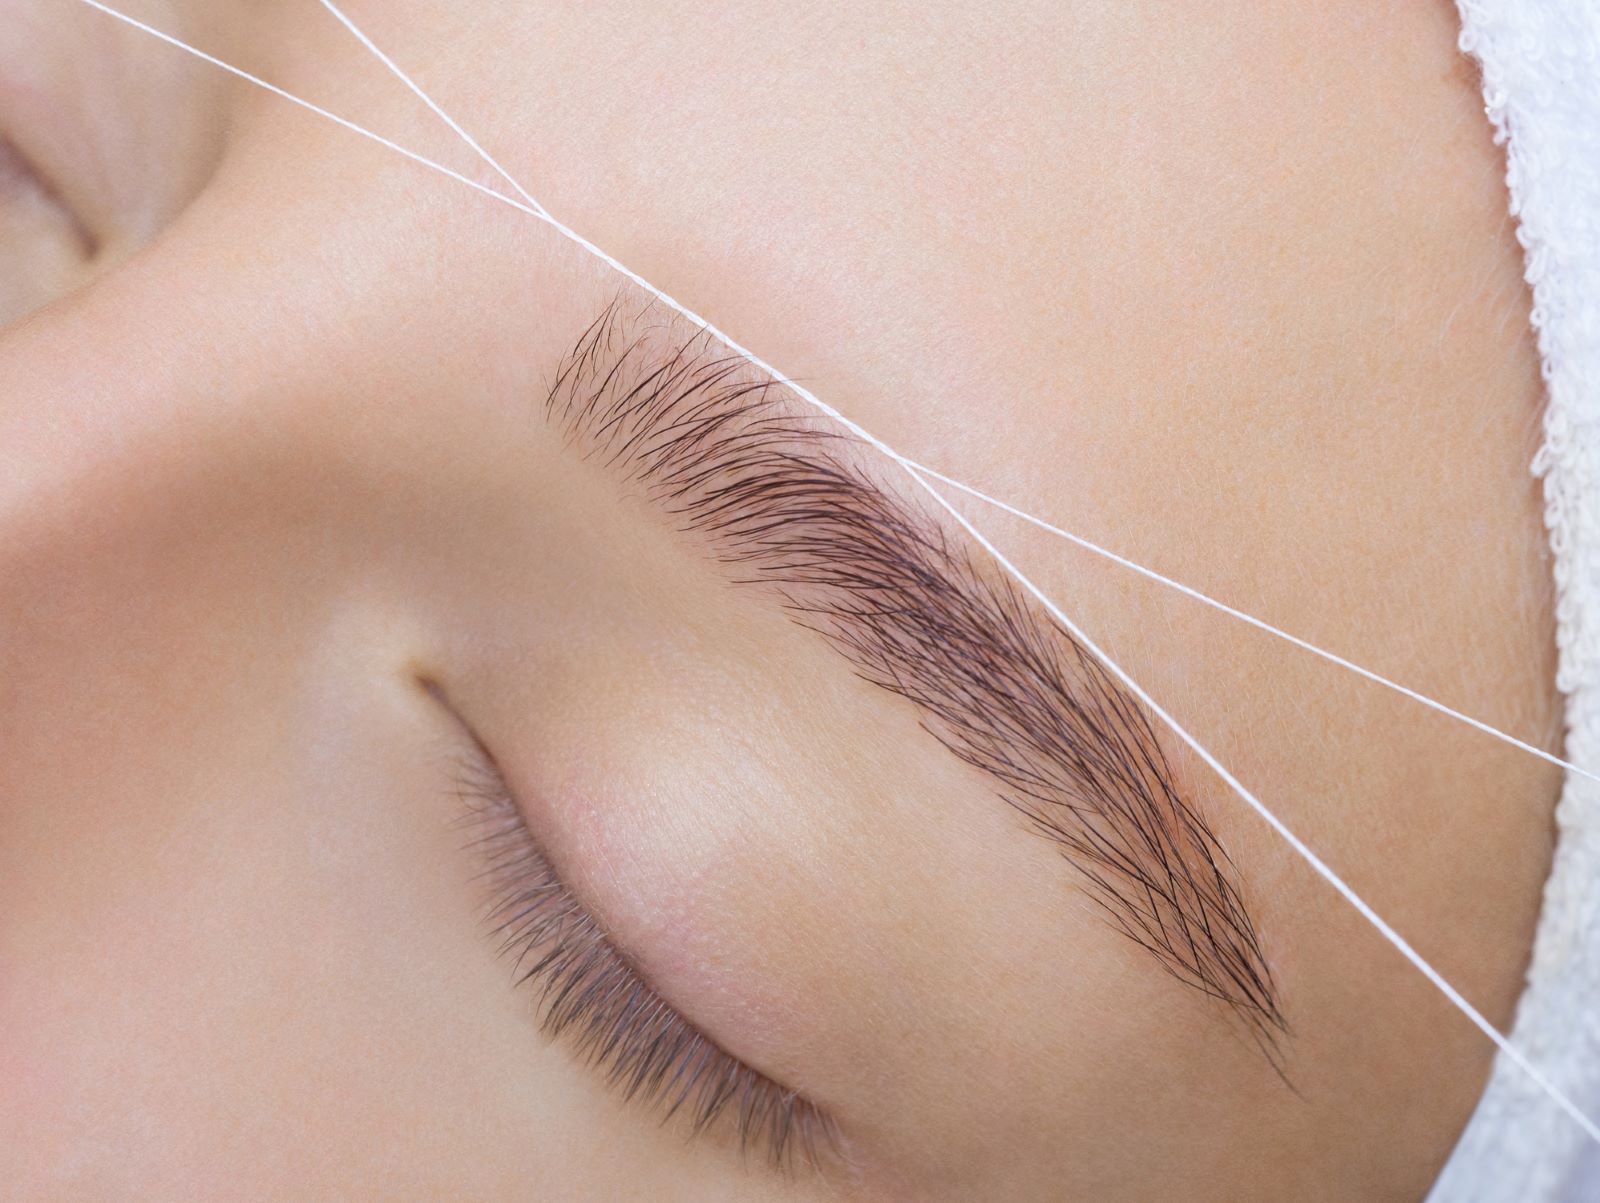 How to regrow eyebrows